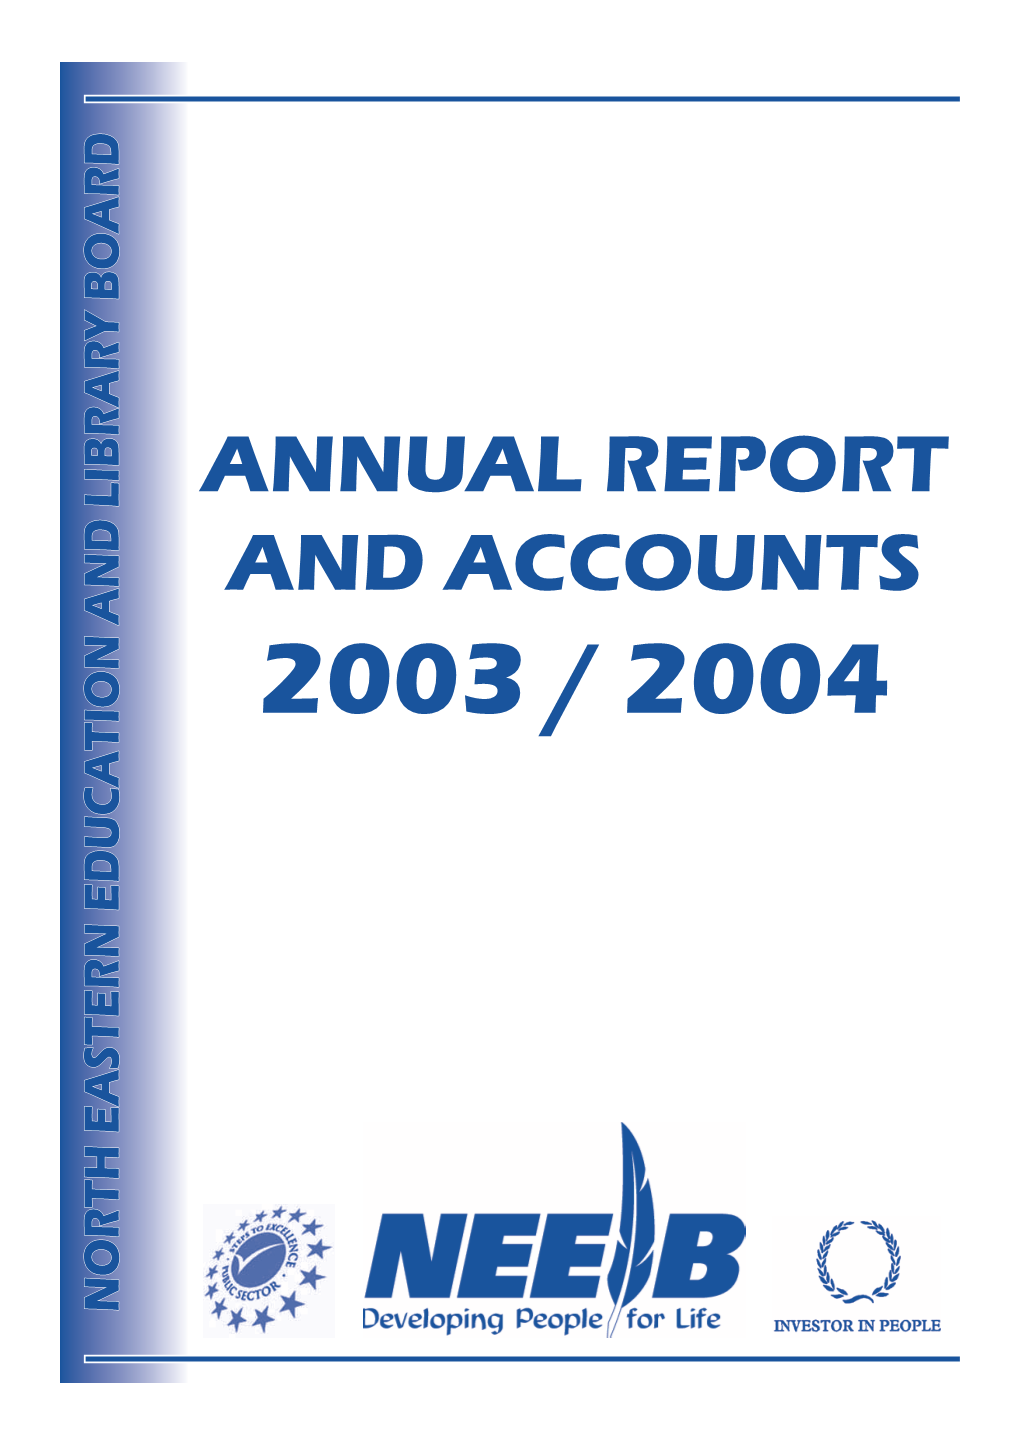 North Eastern Education and Library Board Annual Report and Accounts for the Year Ended 31 March 2004